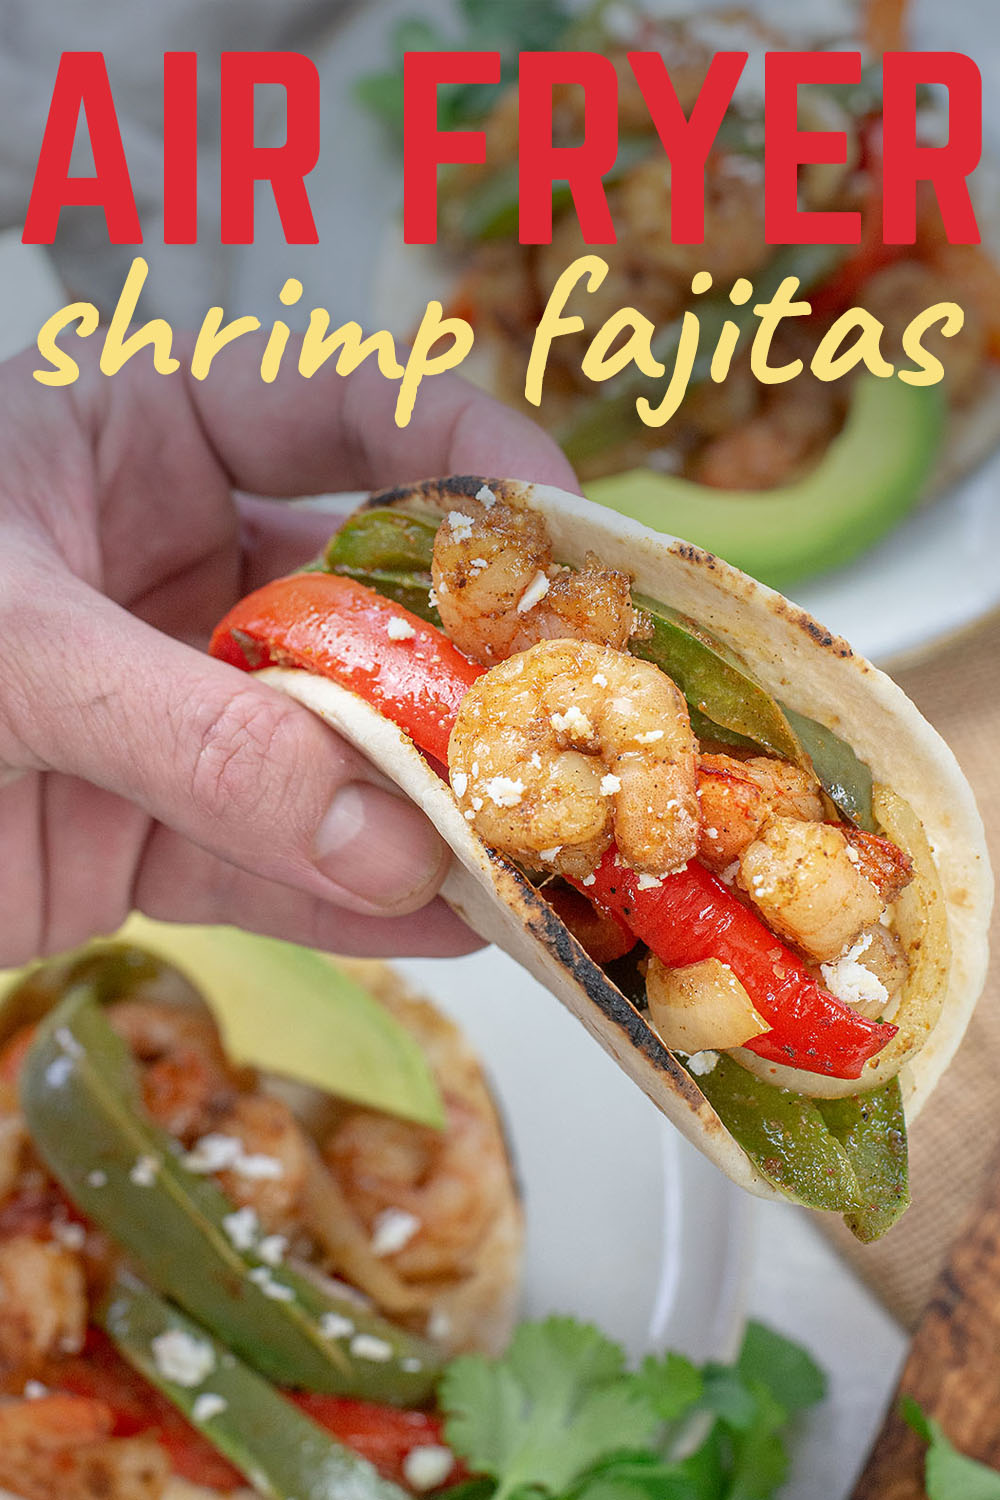 These shrimp fajitas are full of flavor and have a great texture straight from our air fryer!